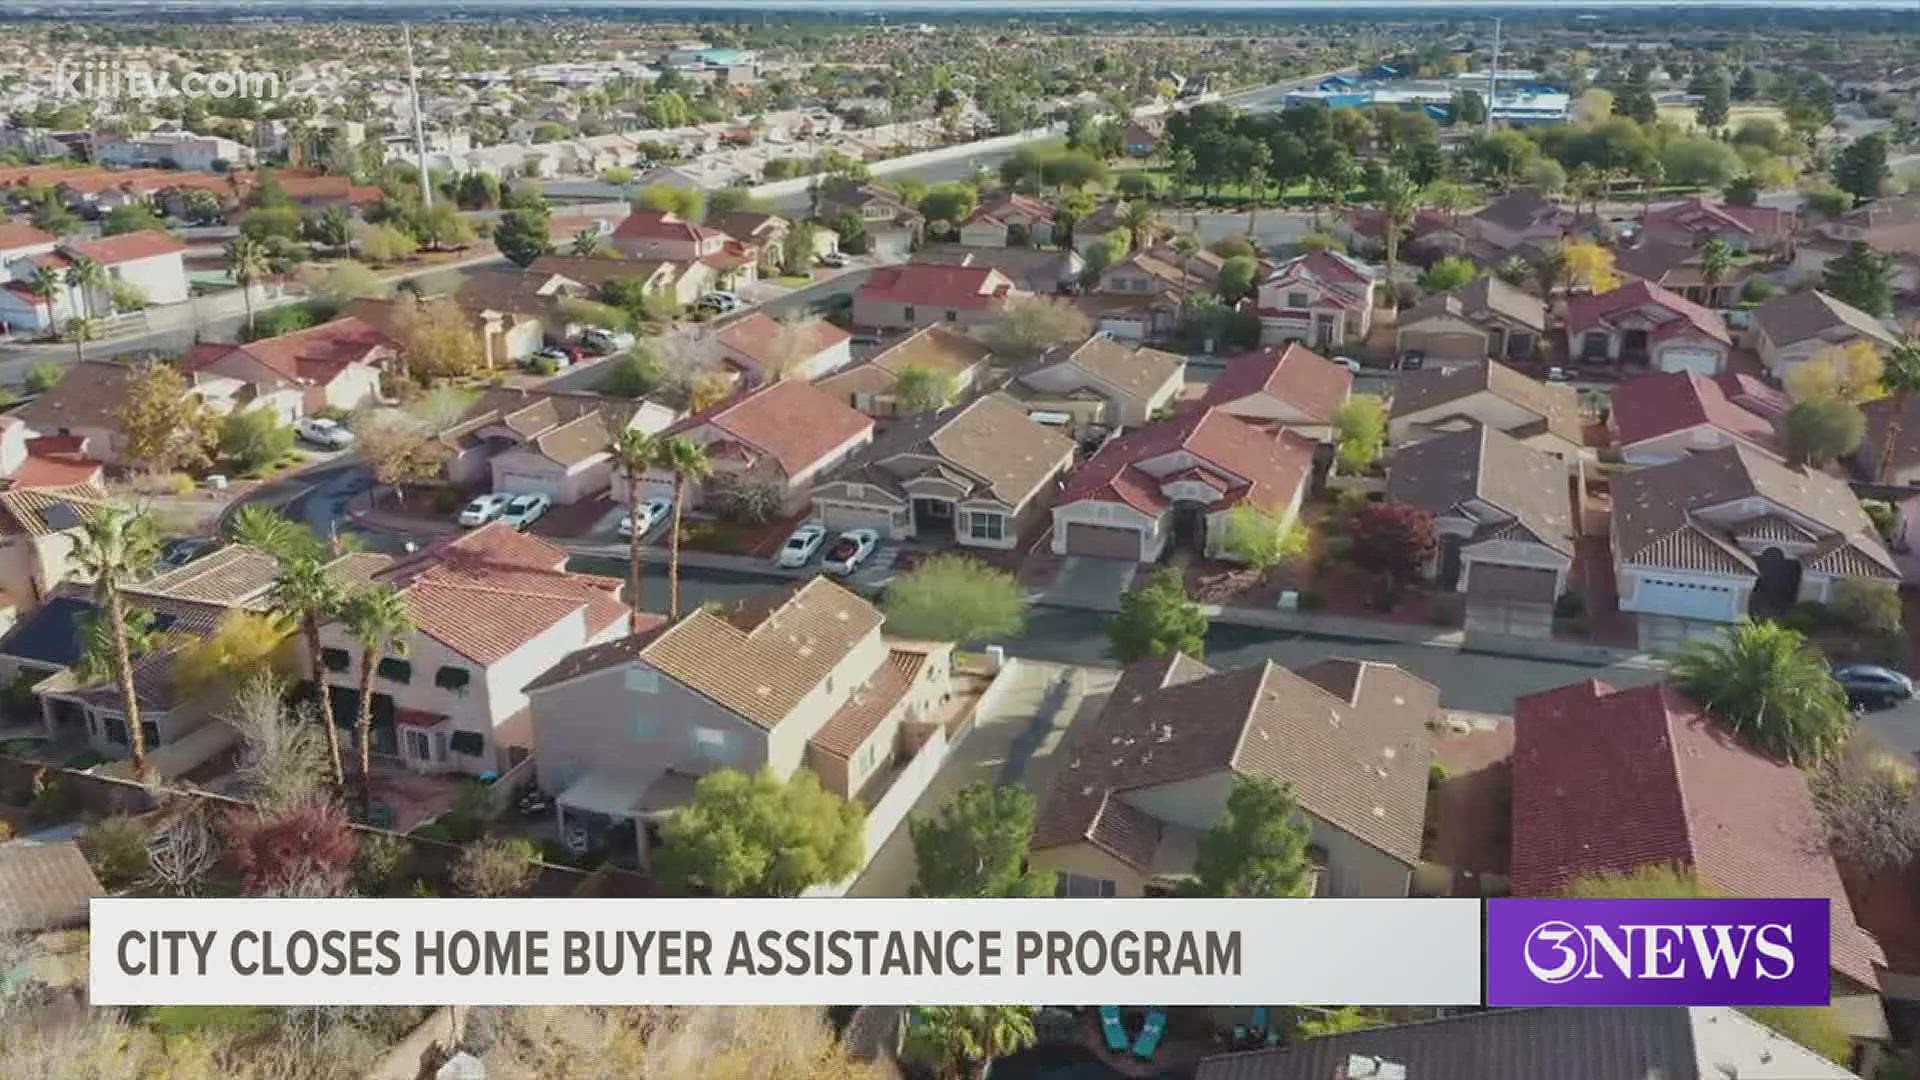 Tracy Cantu with the City's Neighborhood Services Program said the requests for assistance exceeded the amount of available funds the program has to offer.